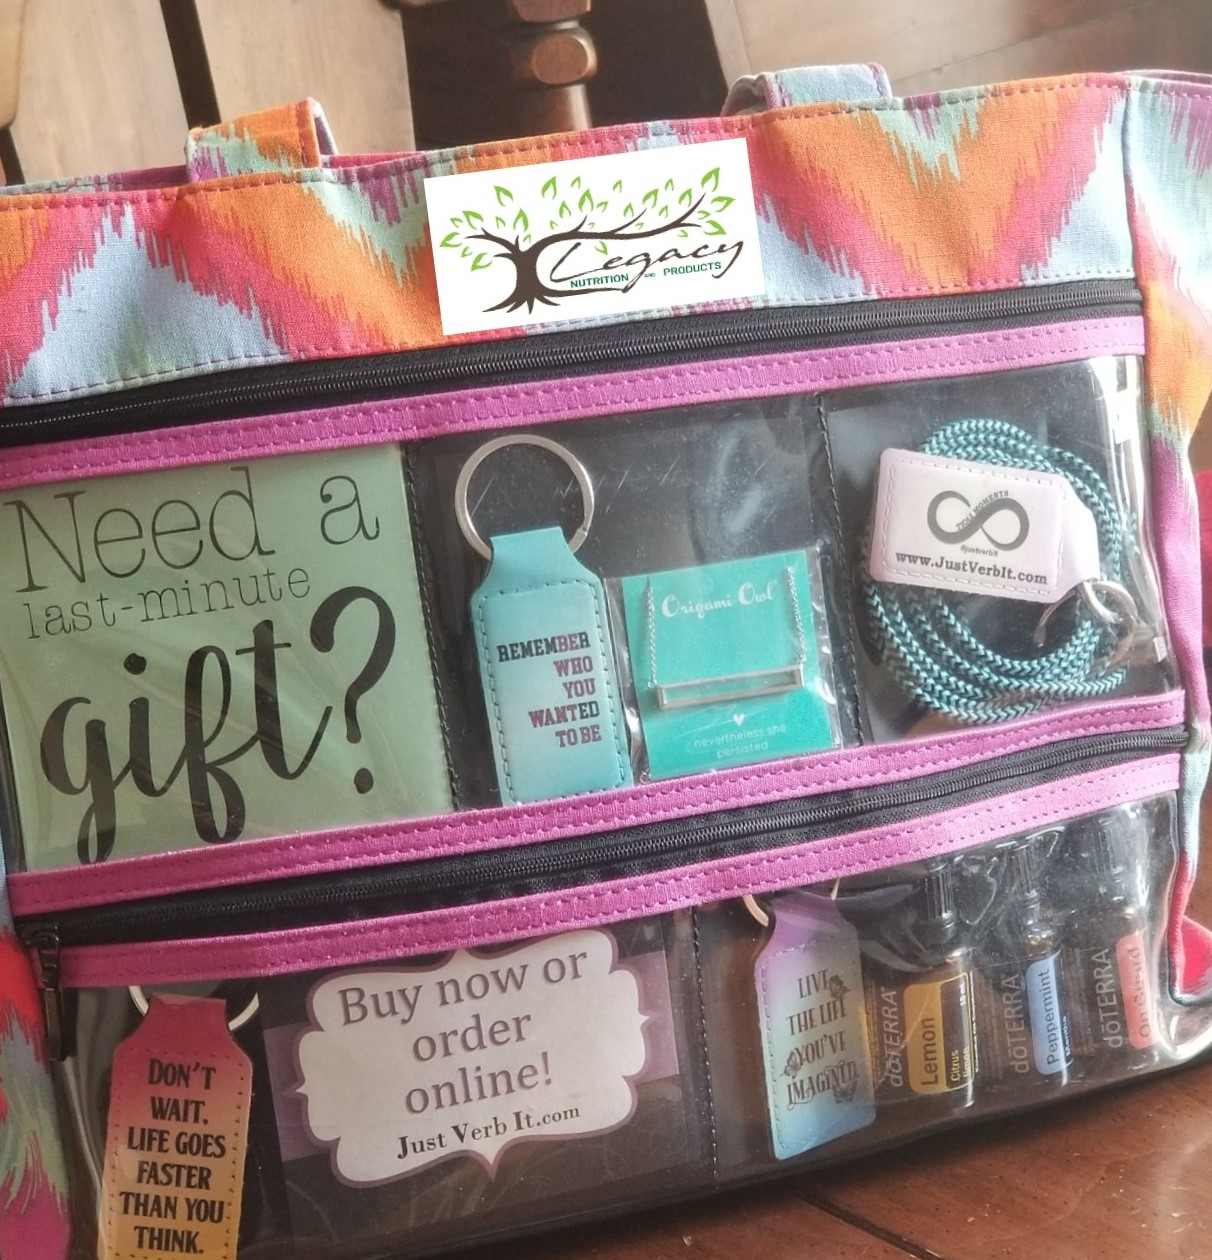 Personalized gifts - gifts to help relax - Origami Owl - Think Goodness - DoTerra Essential Oils - Legacy Nutrition and Products